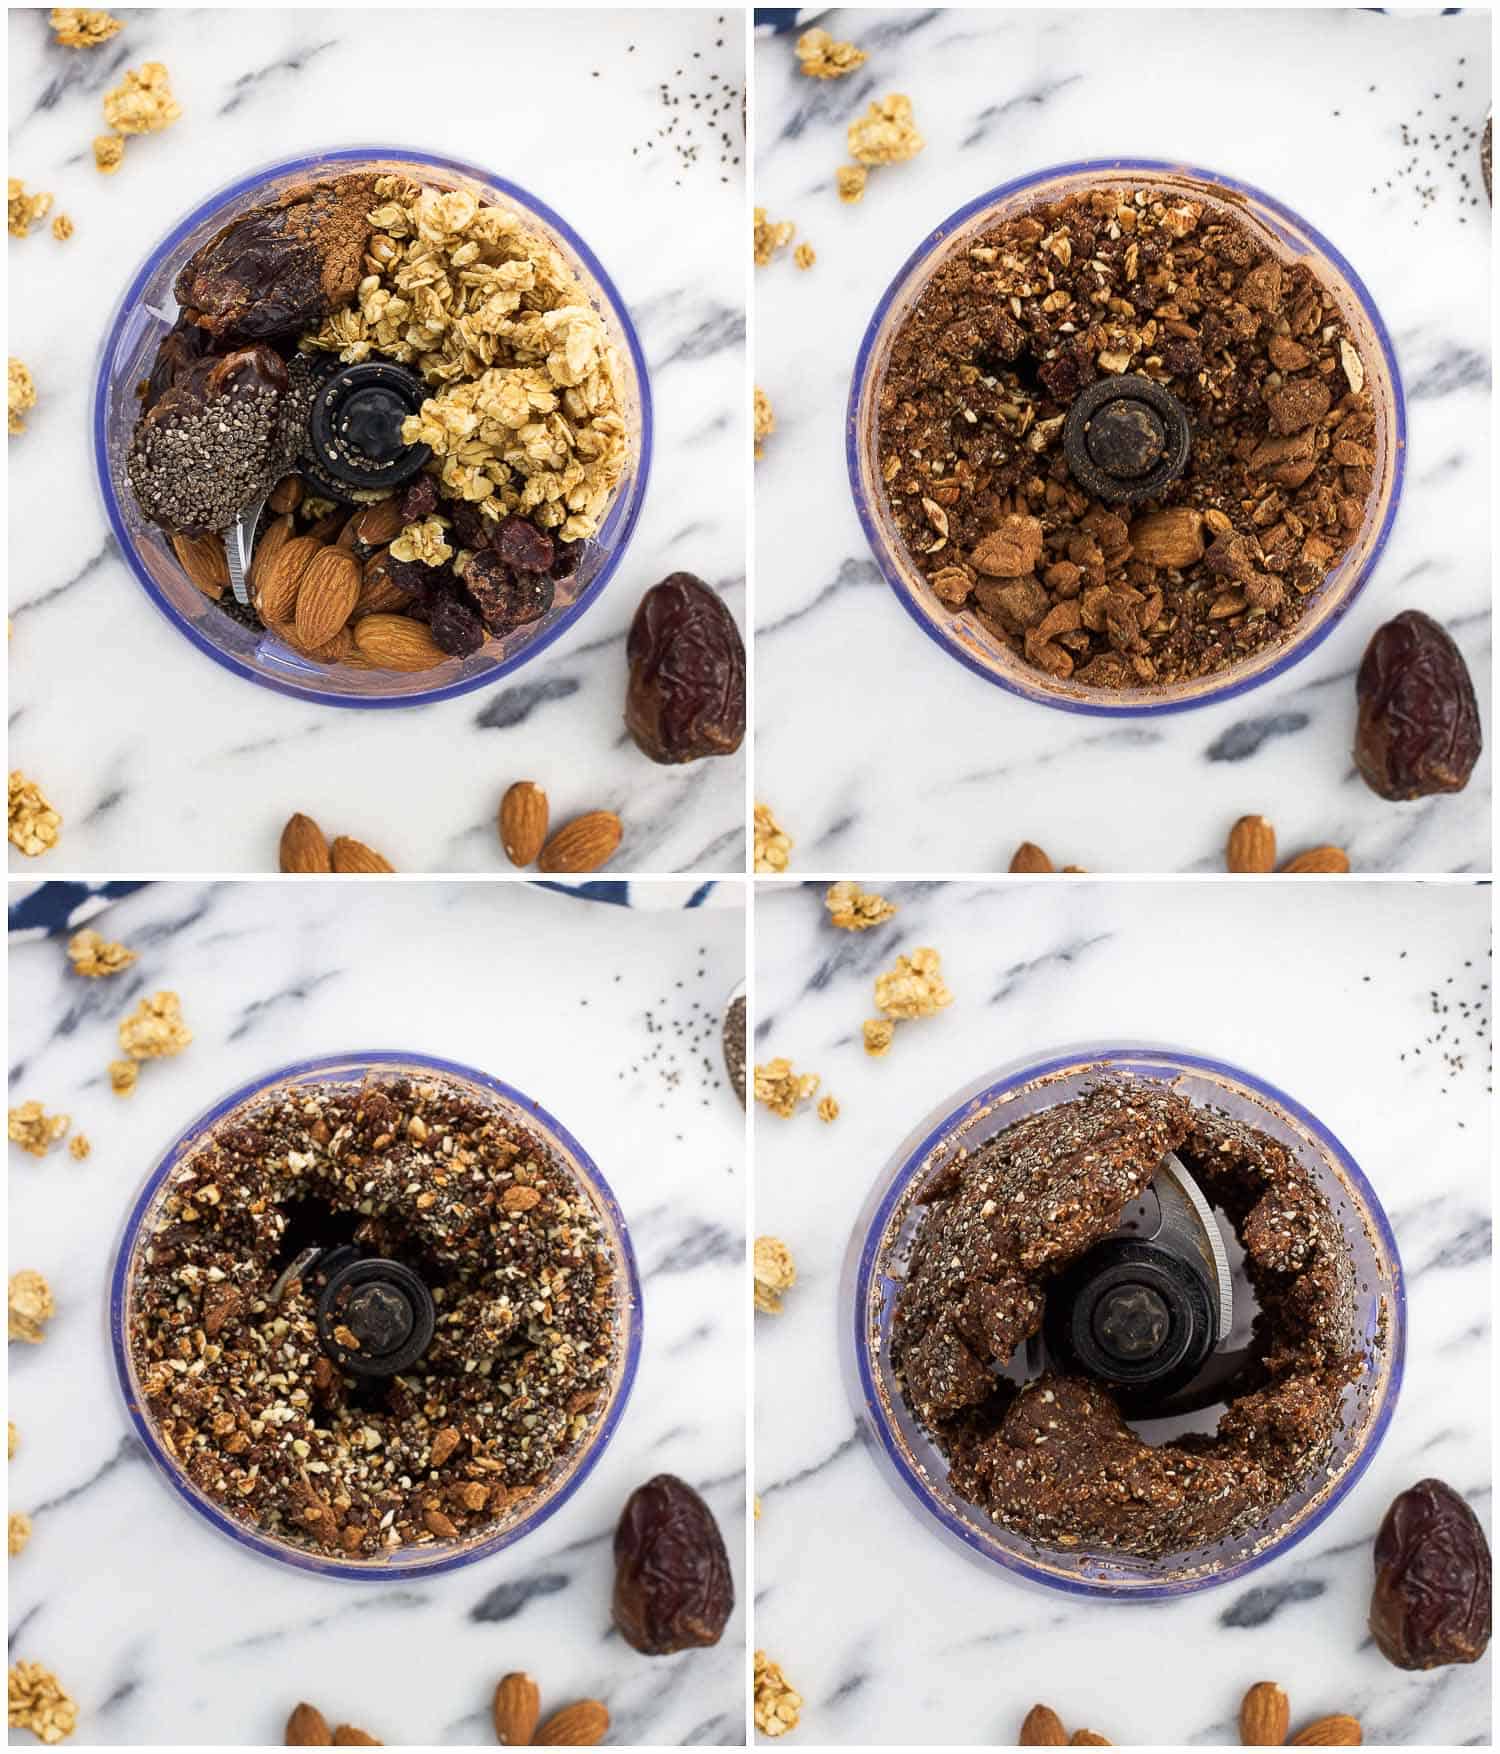 A four-image collage of the ingredients in a food processor in varying stages of being blended together